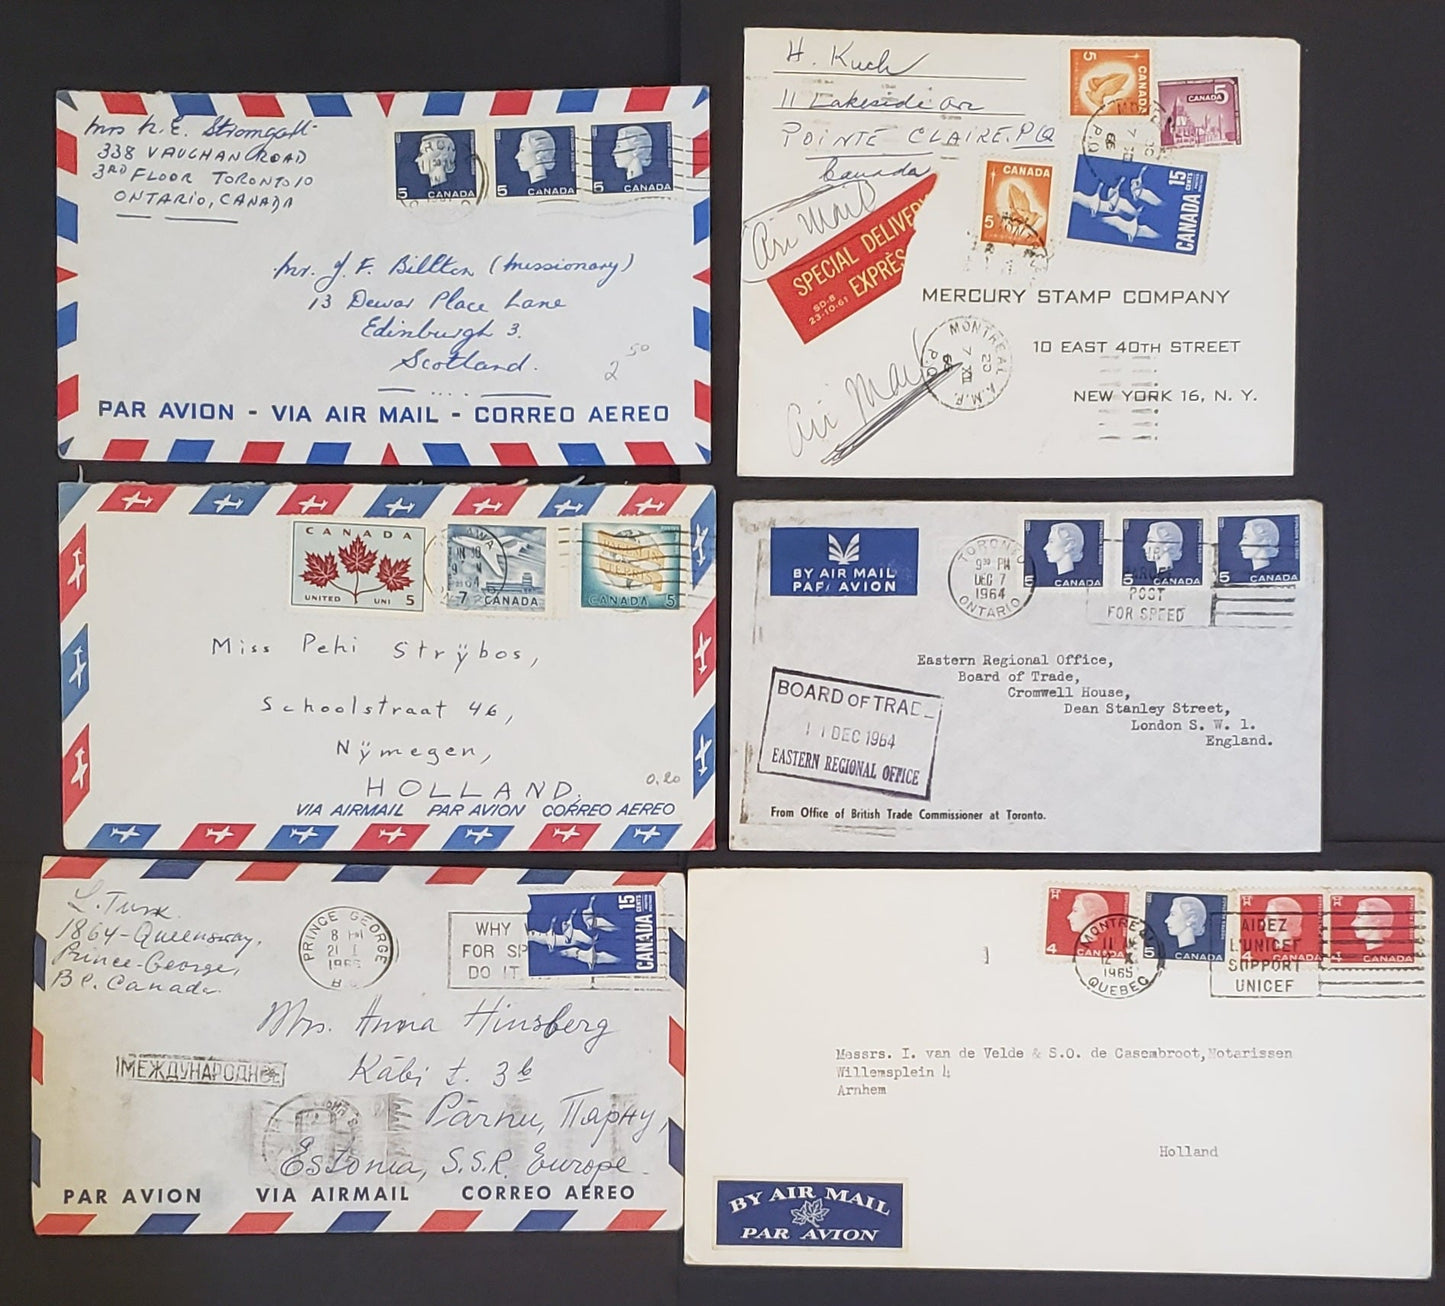 Lot 250 Canada #404-405as, 414-415 4c-15c Carmine-Ultramarine Queen Elizabeth II, Jet Plane & Canadian Geese 1962-1964 Cameo & Jet Definitives, 6 Commercial Covers Franked With Combination Singles, All Airmail Rates, Cat. Value $20